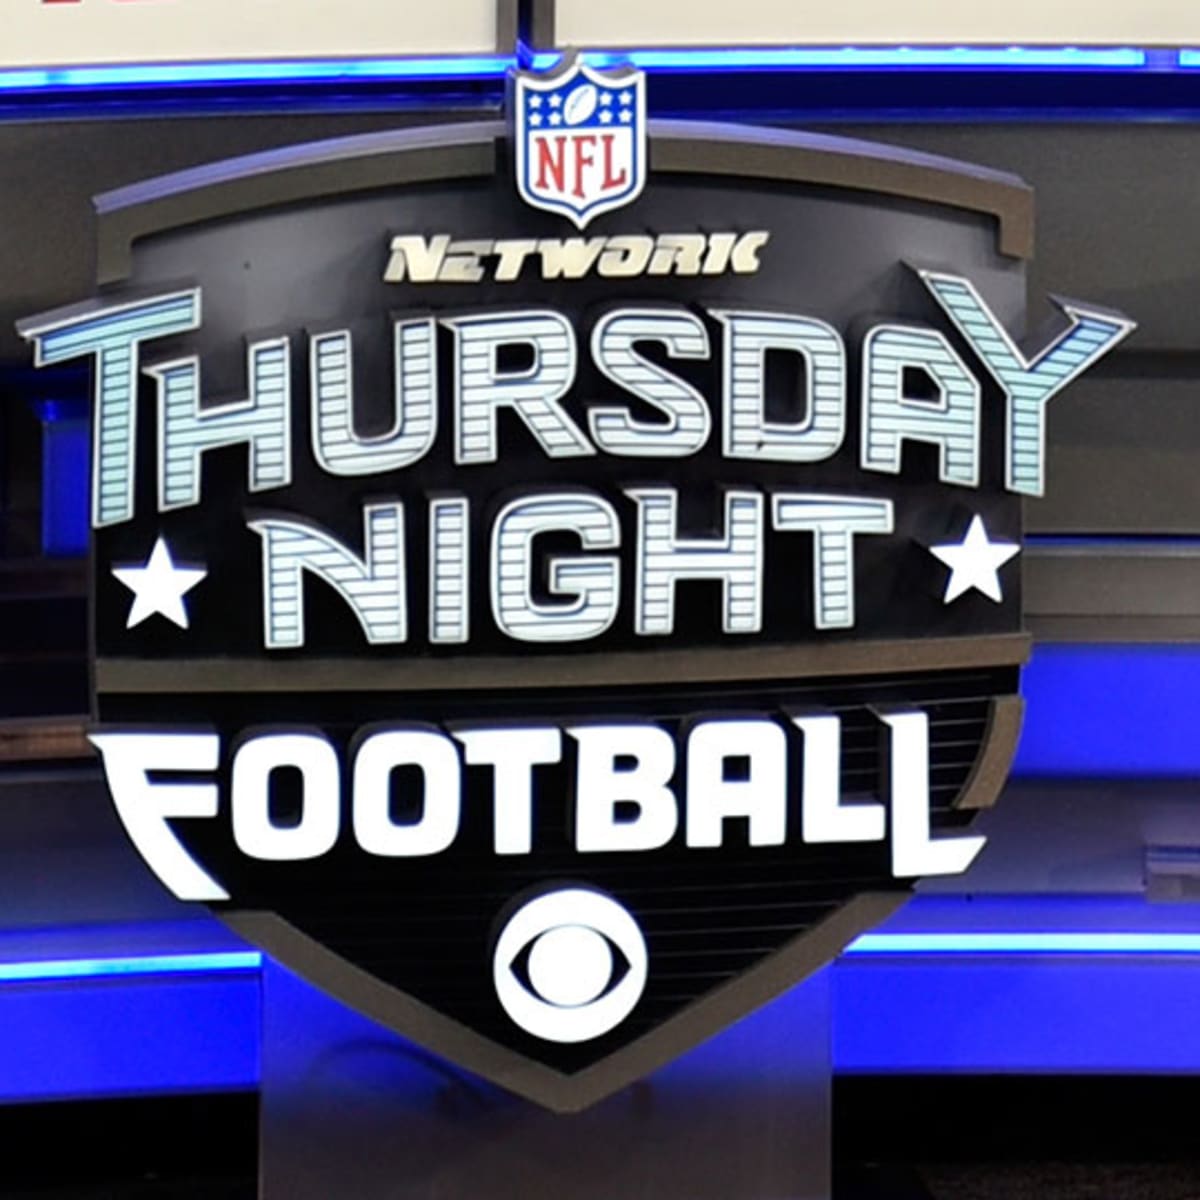 NFL Preseason Schedule 2015: Game times, TV channel, online streaming, how  to watch on Saturday, August 29 - Bleeding Green Nation